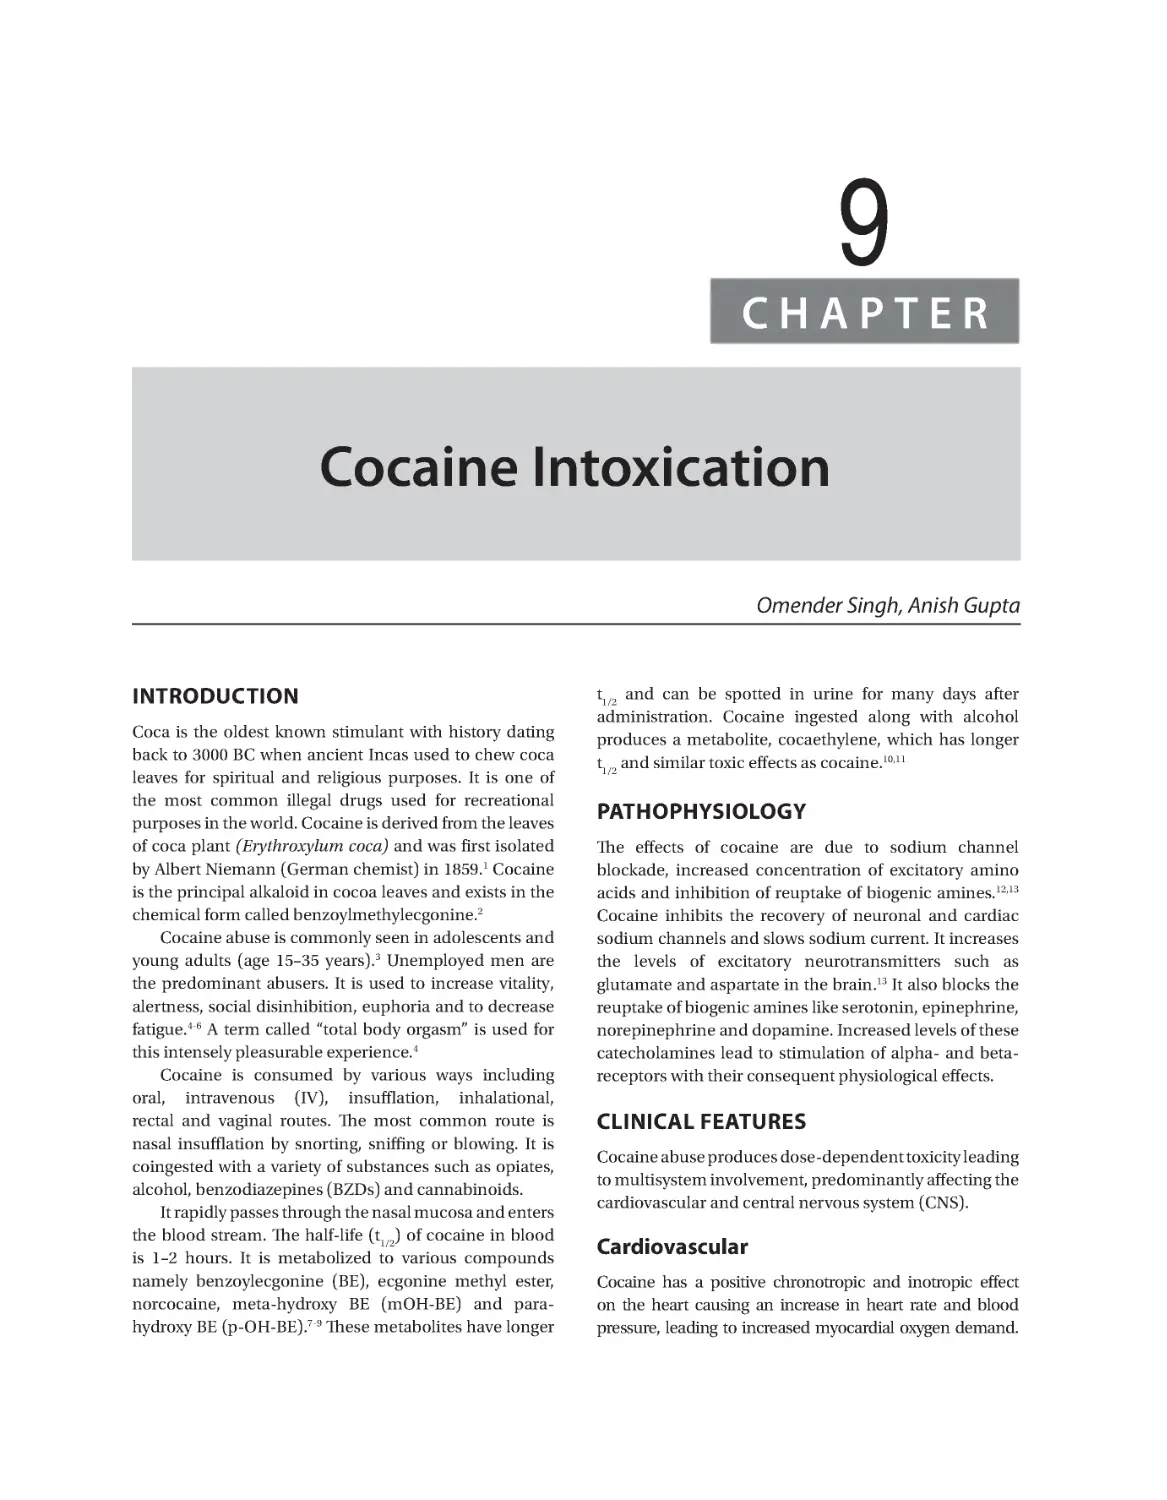 Chapter 9: Cocaine Intoxication